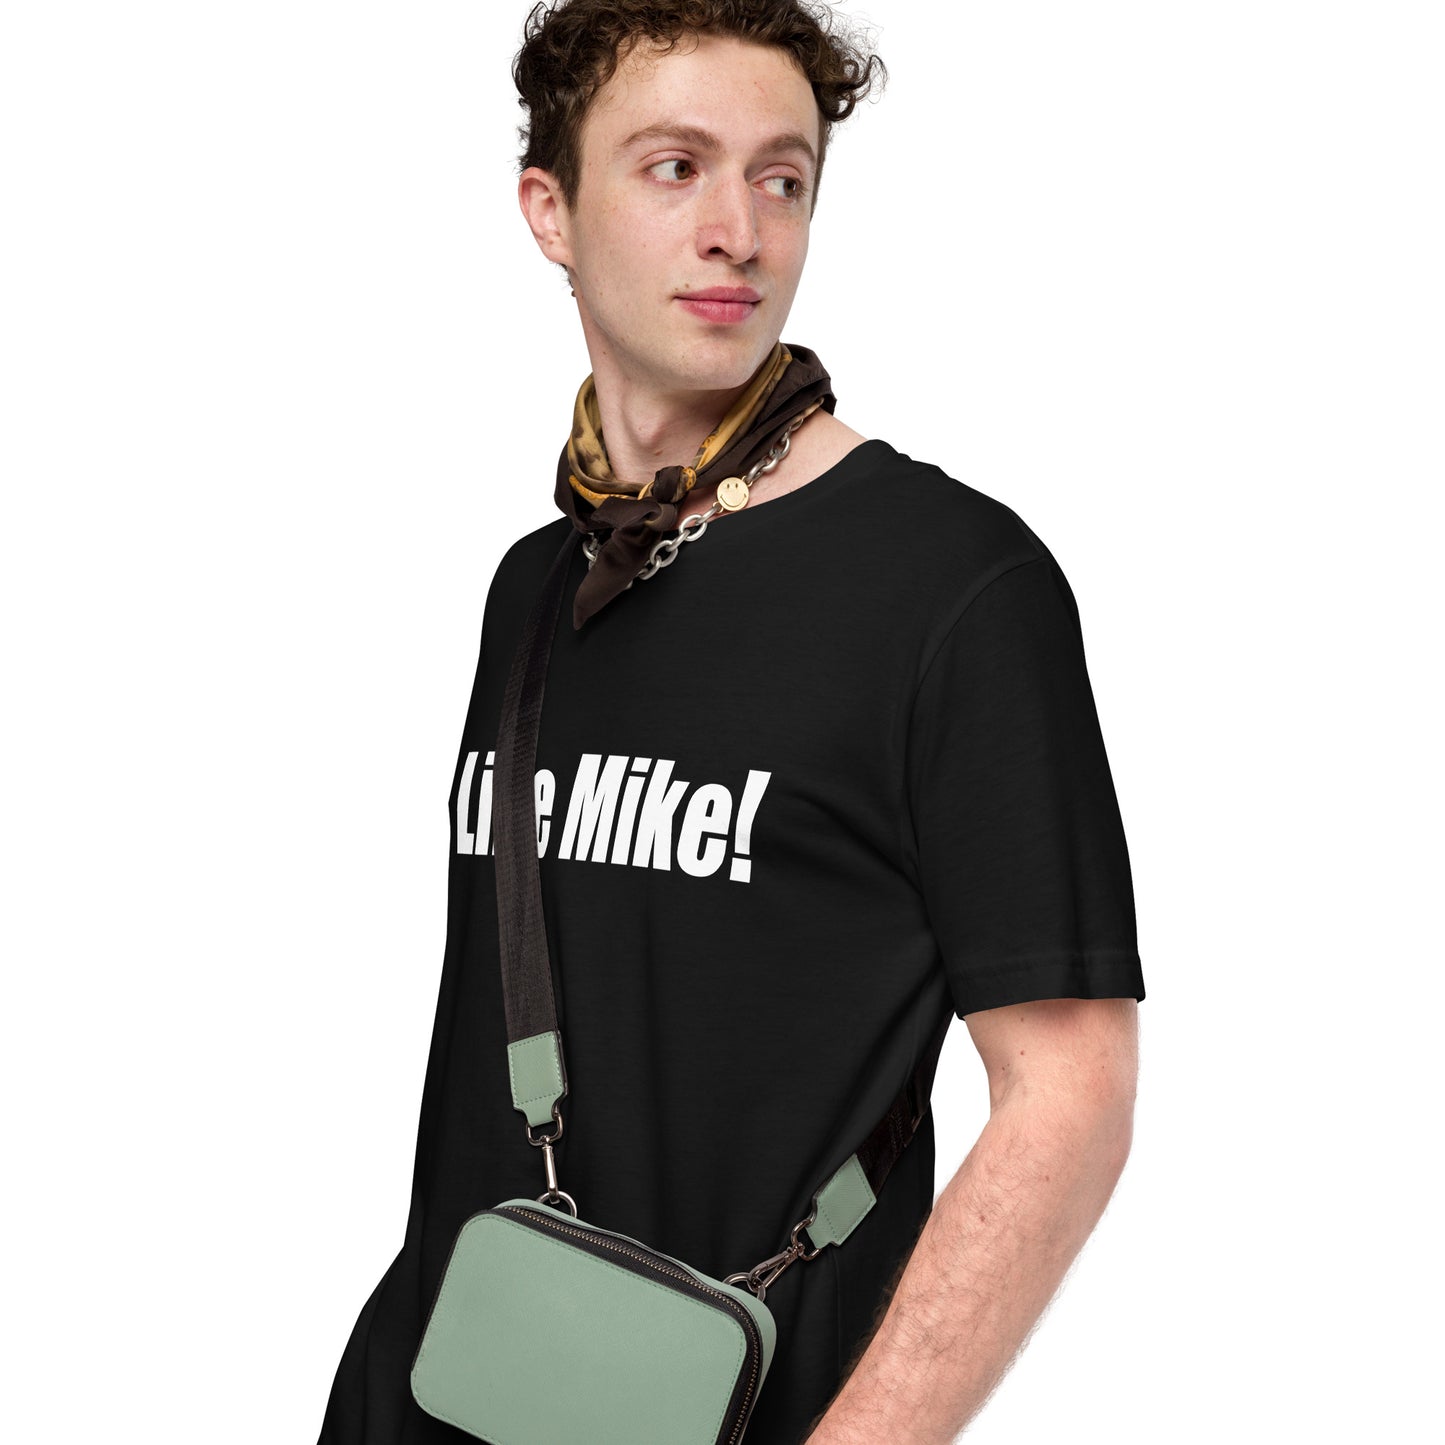 Like mike Men's t-shirt-Perfect Fit for Men